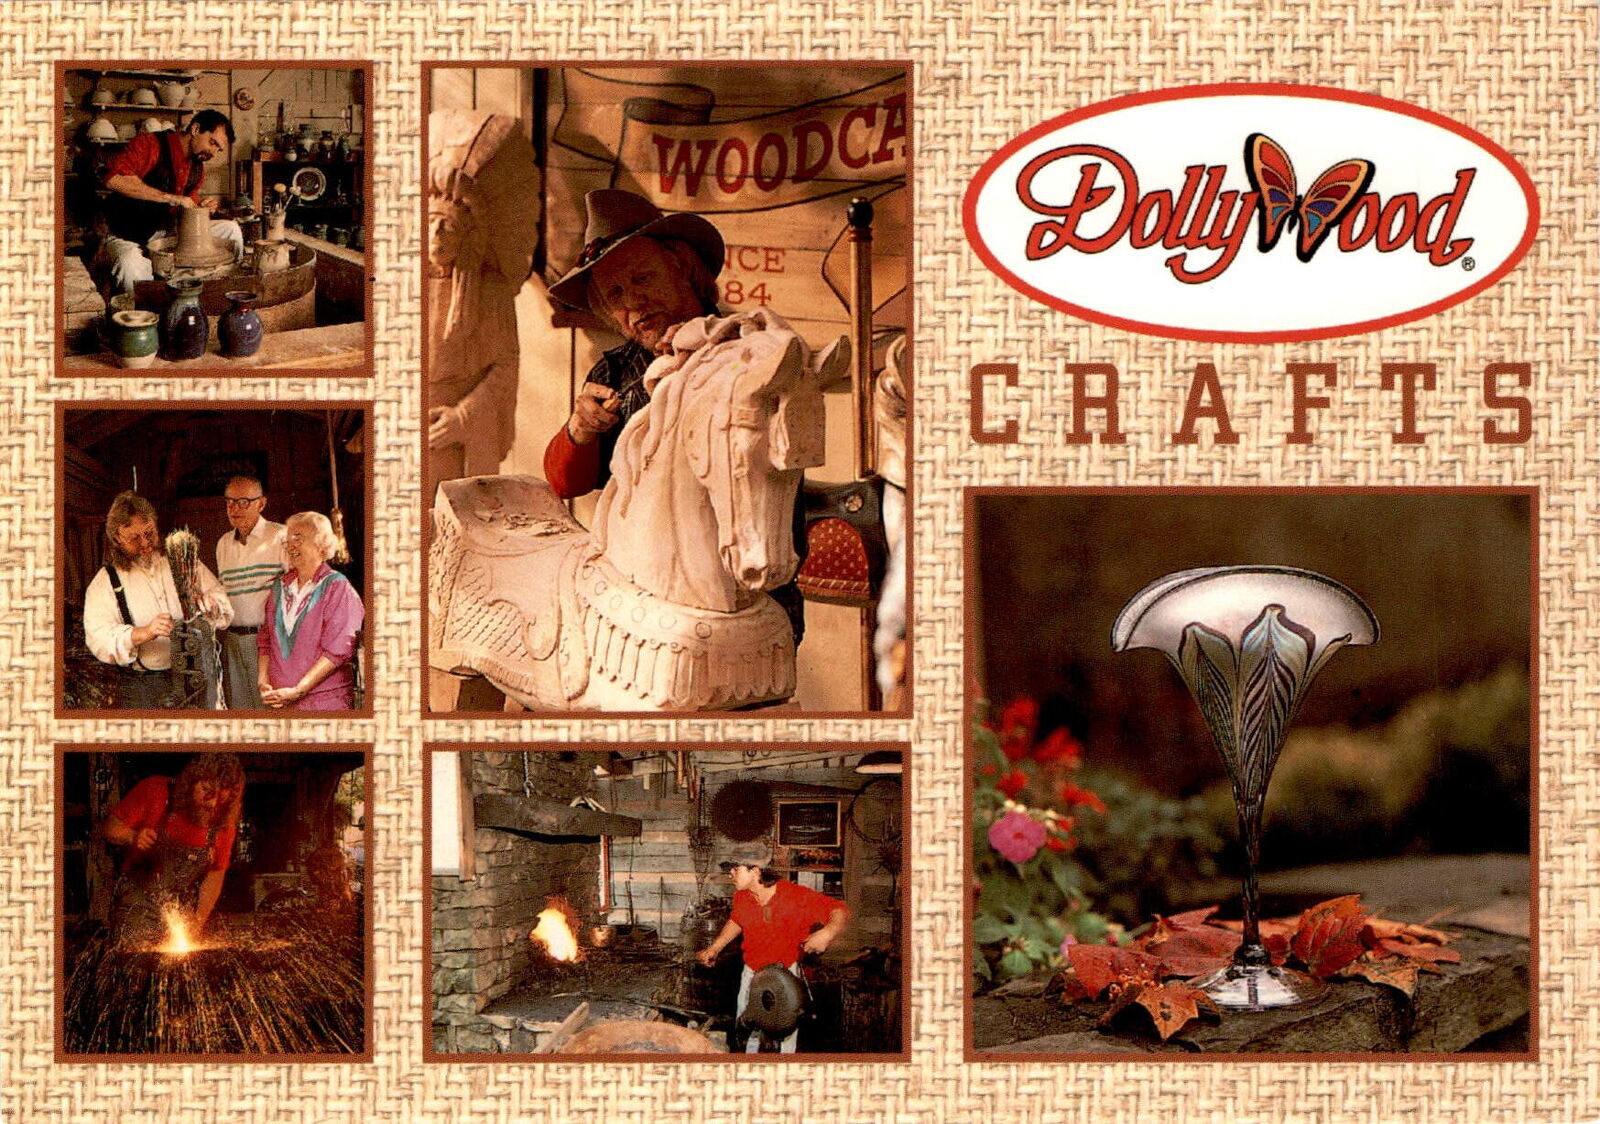 Dollywood, Pigeon Forge, Tennessee, mountain craft traditions, skilled Postcard